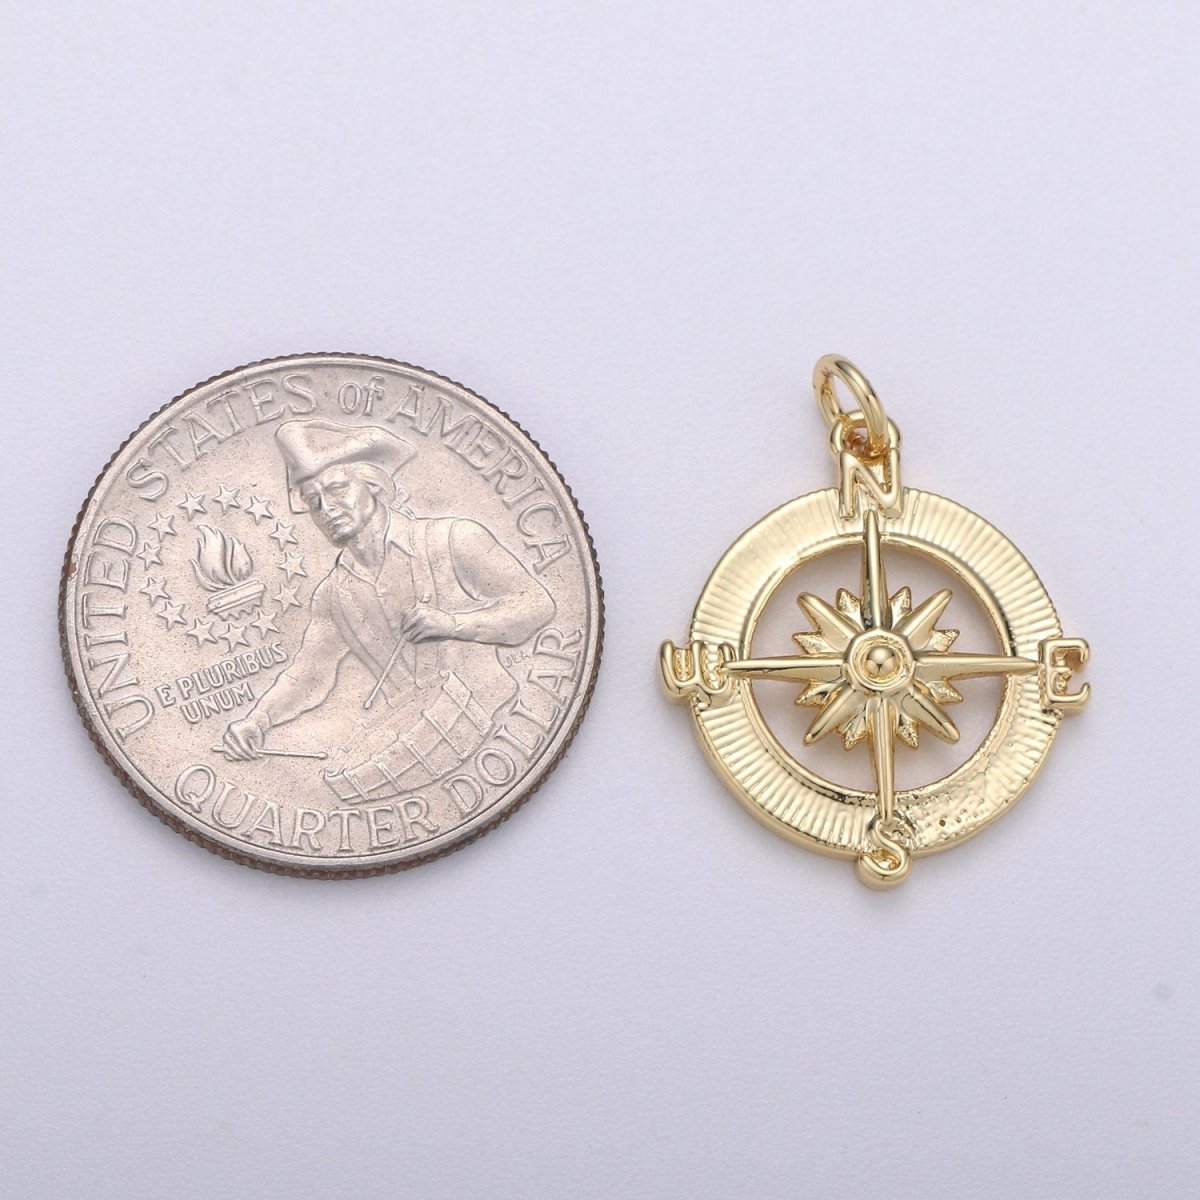 14k Gold Filled Dainty Compass Charm, Gold Compass Pendant, North Star Charm, Travel Charms, Nautical Charms for Bracelet Earring Necklace C-466 - DLUXCA